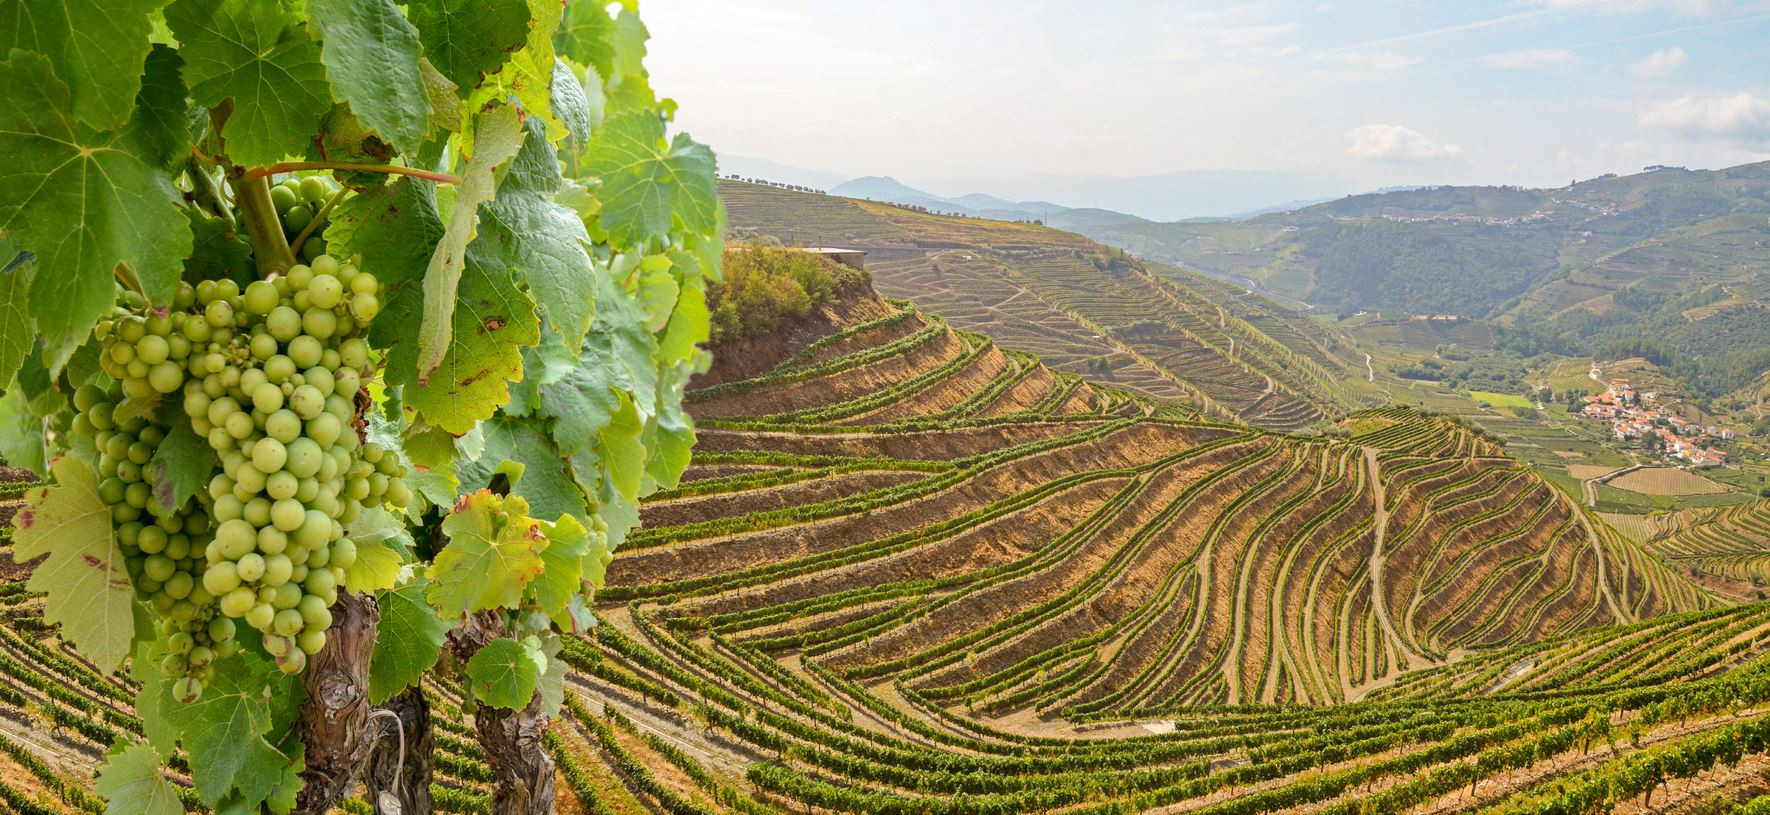 The best wine tasting tours in Portugal